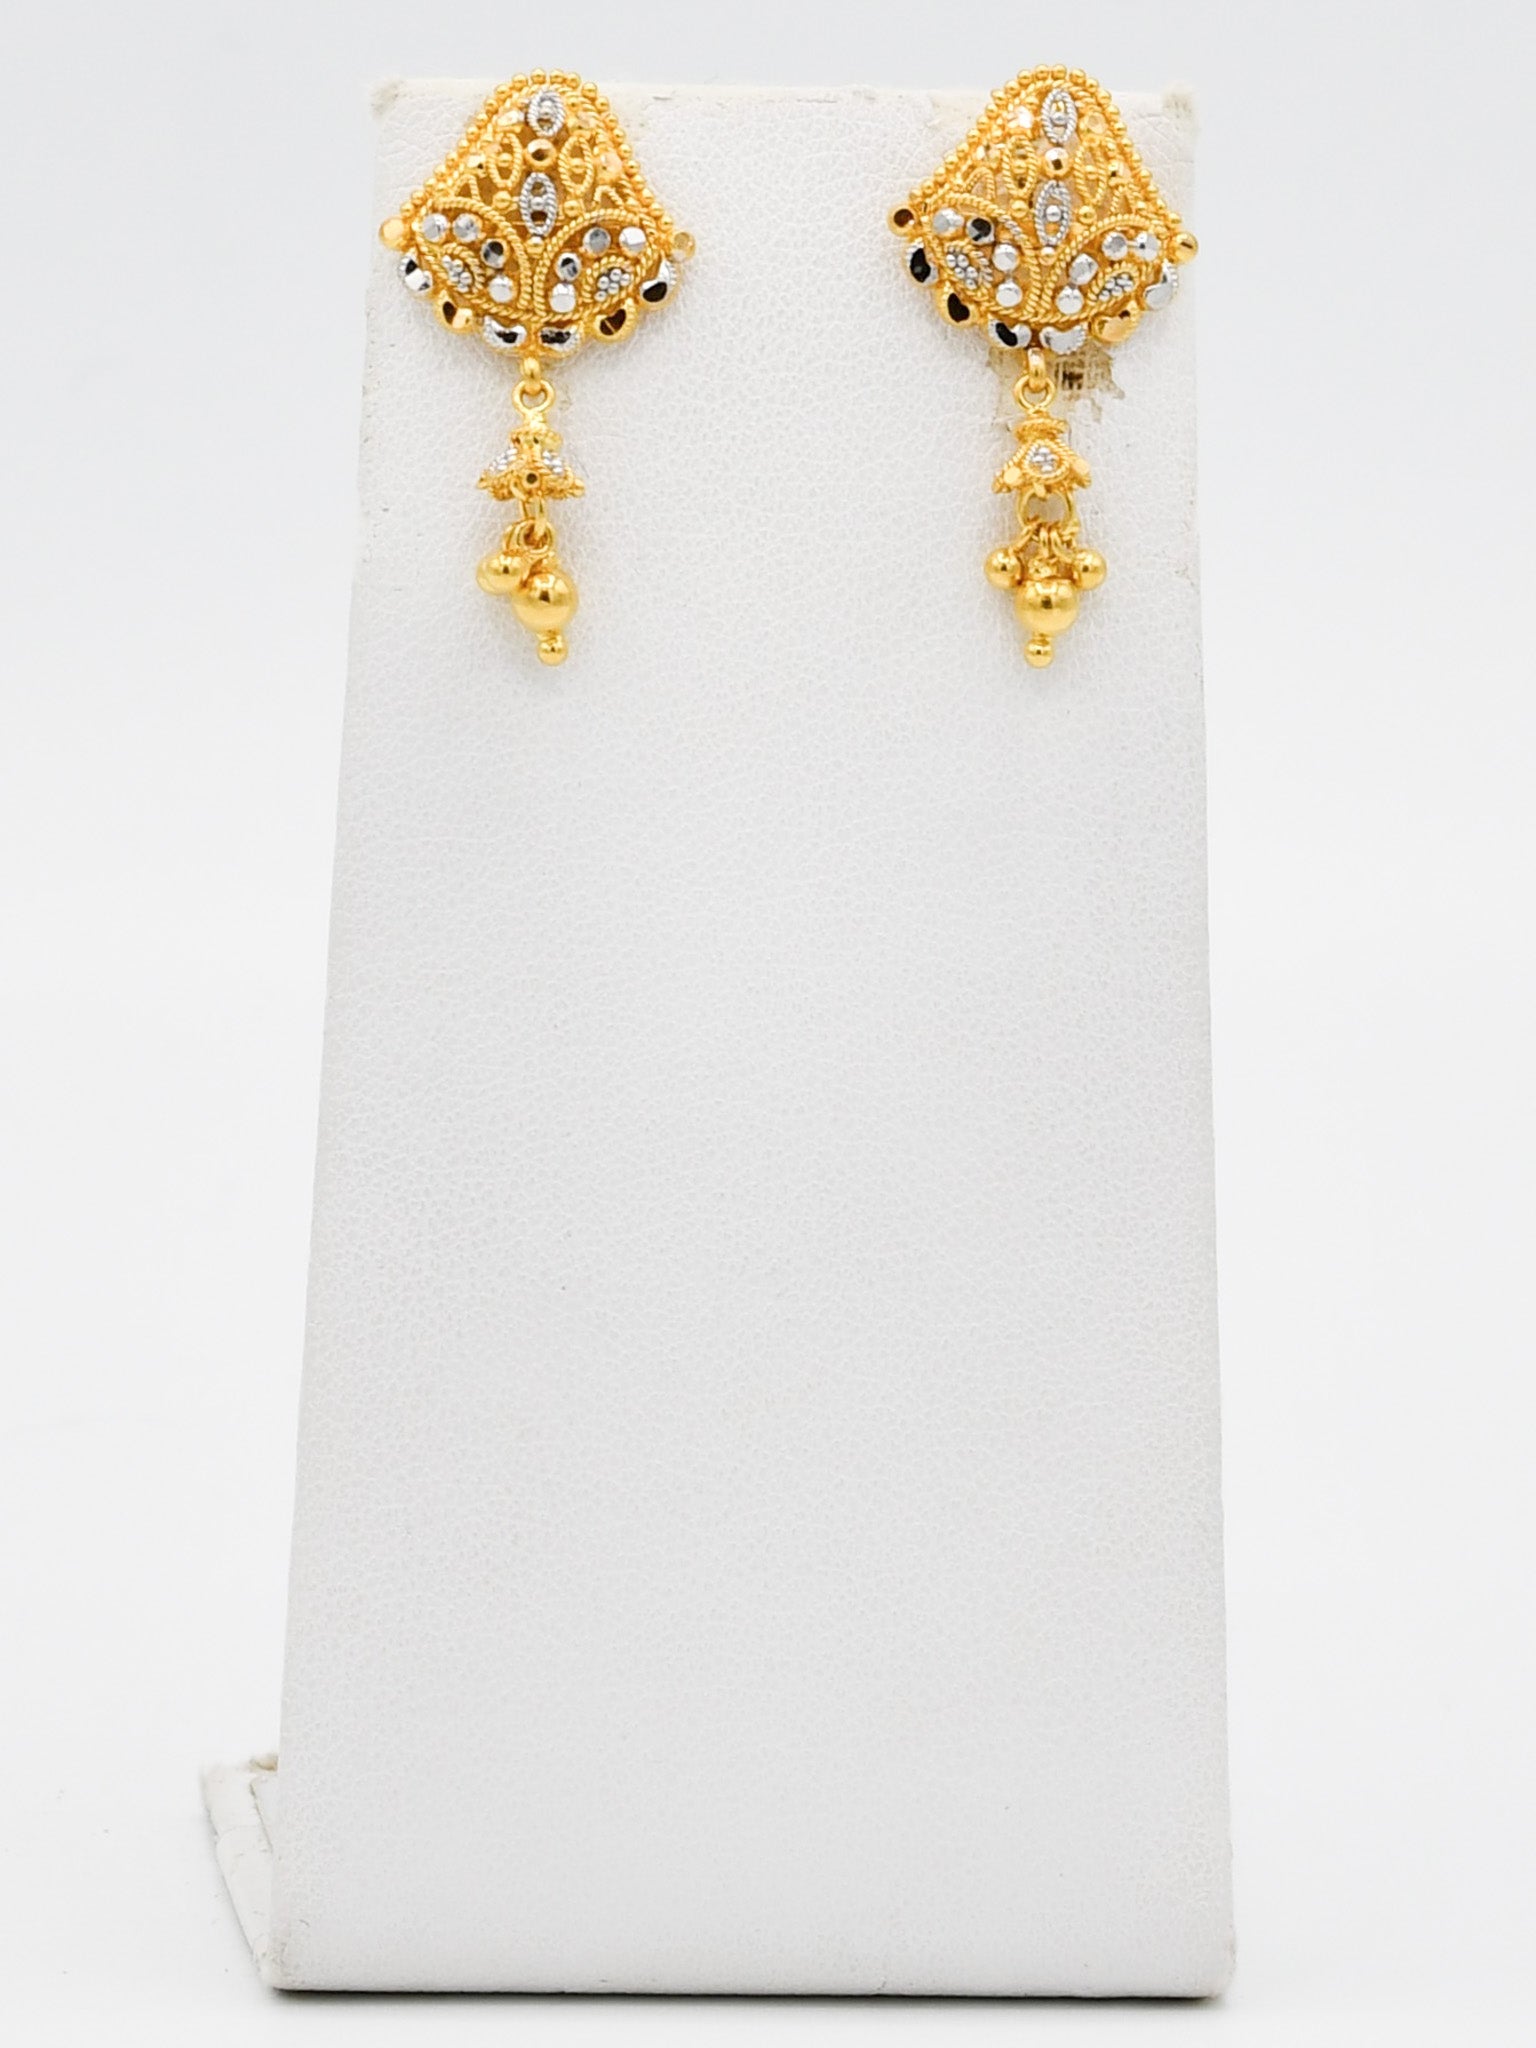 22ct Gold Two Tone Necklace Set - Roop Darshan